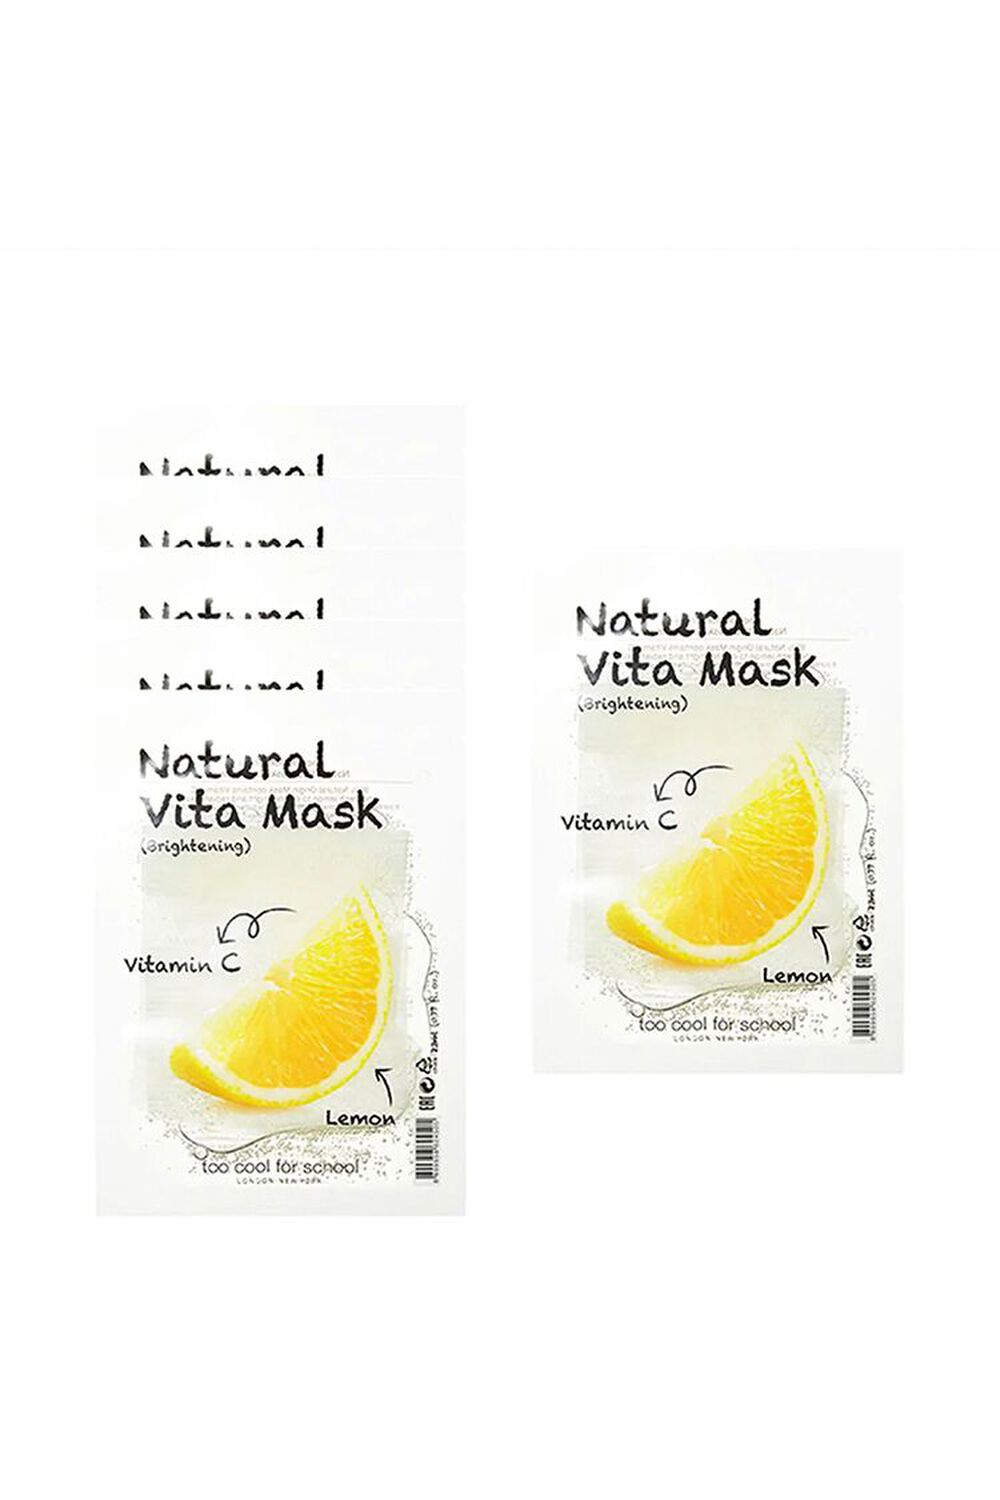 Too Cool For School Natural Vita Mask Brightening, image 3